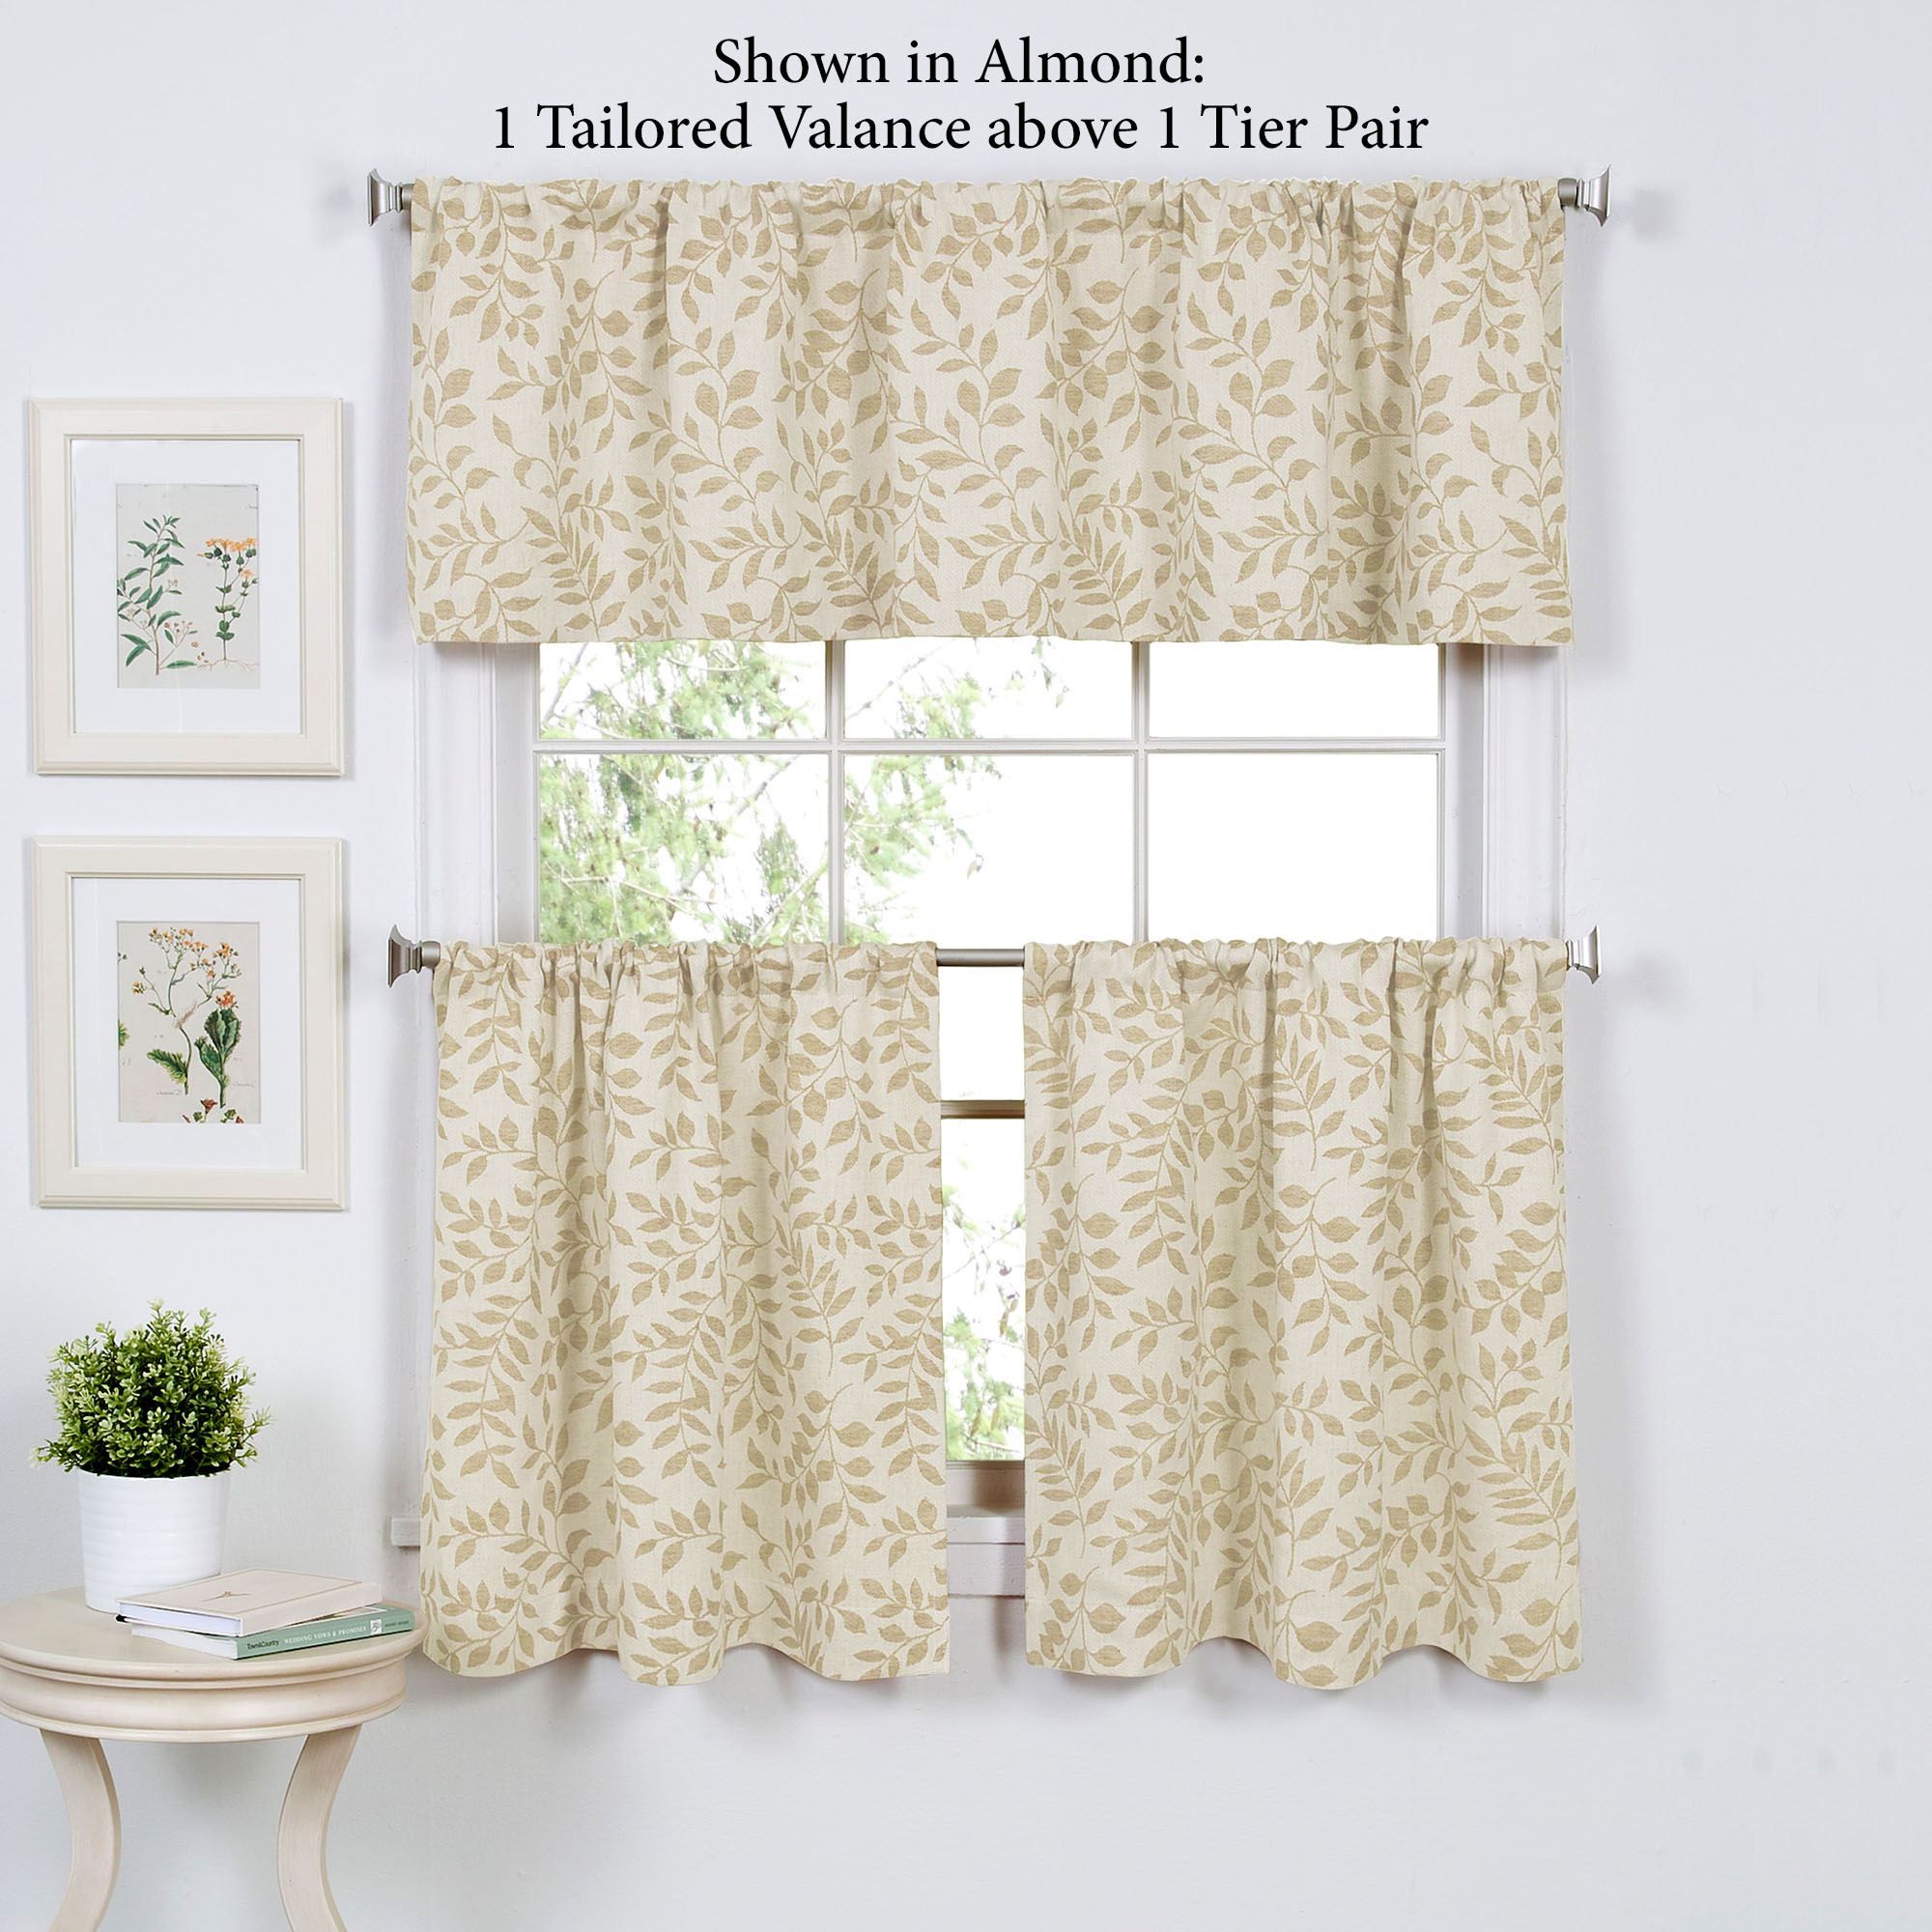 Tranquil Leaf Design Tier Window Treatment With Tranquility Curtain Tier Pairs (View 8 of 20)